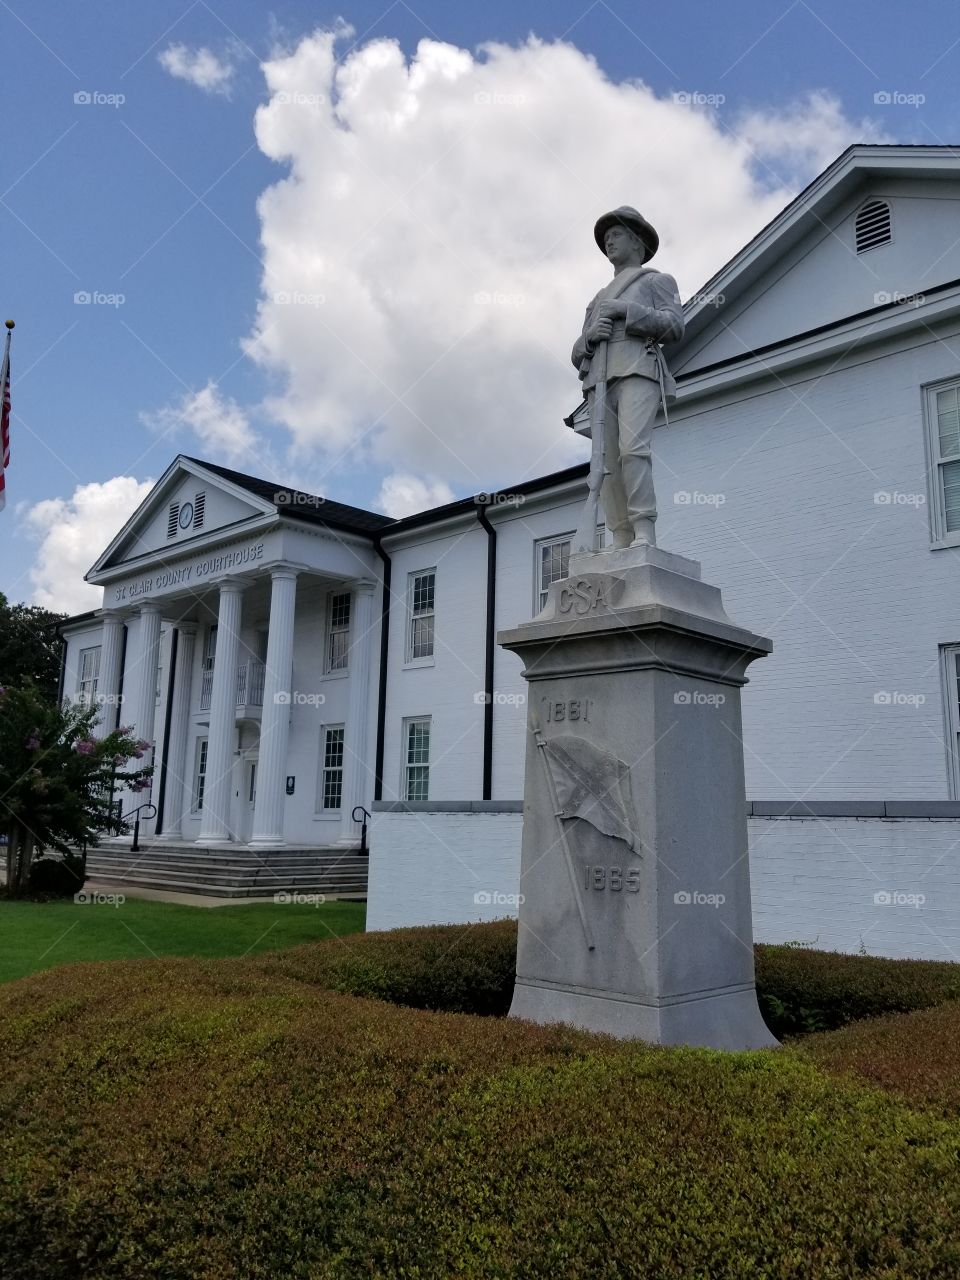 St. Clair Court House in Ashville Alabama, steeped in history.